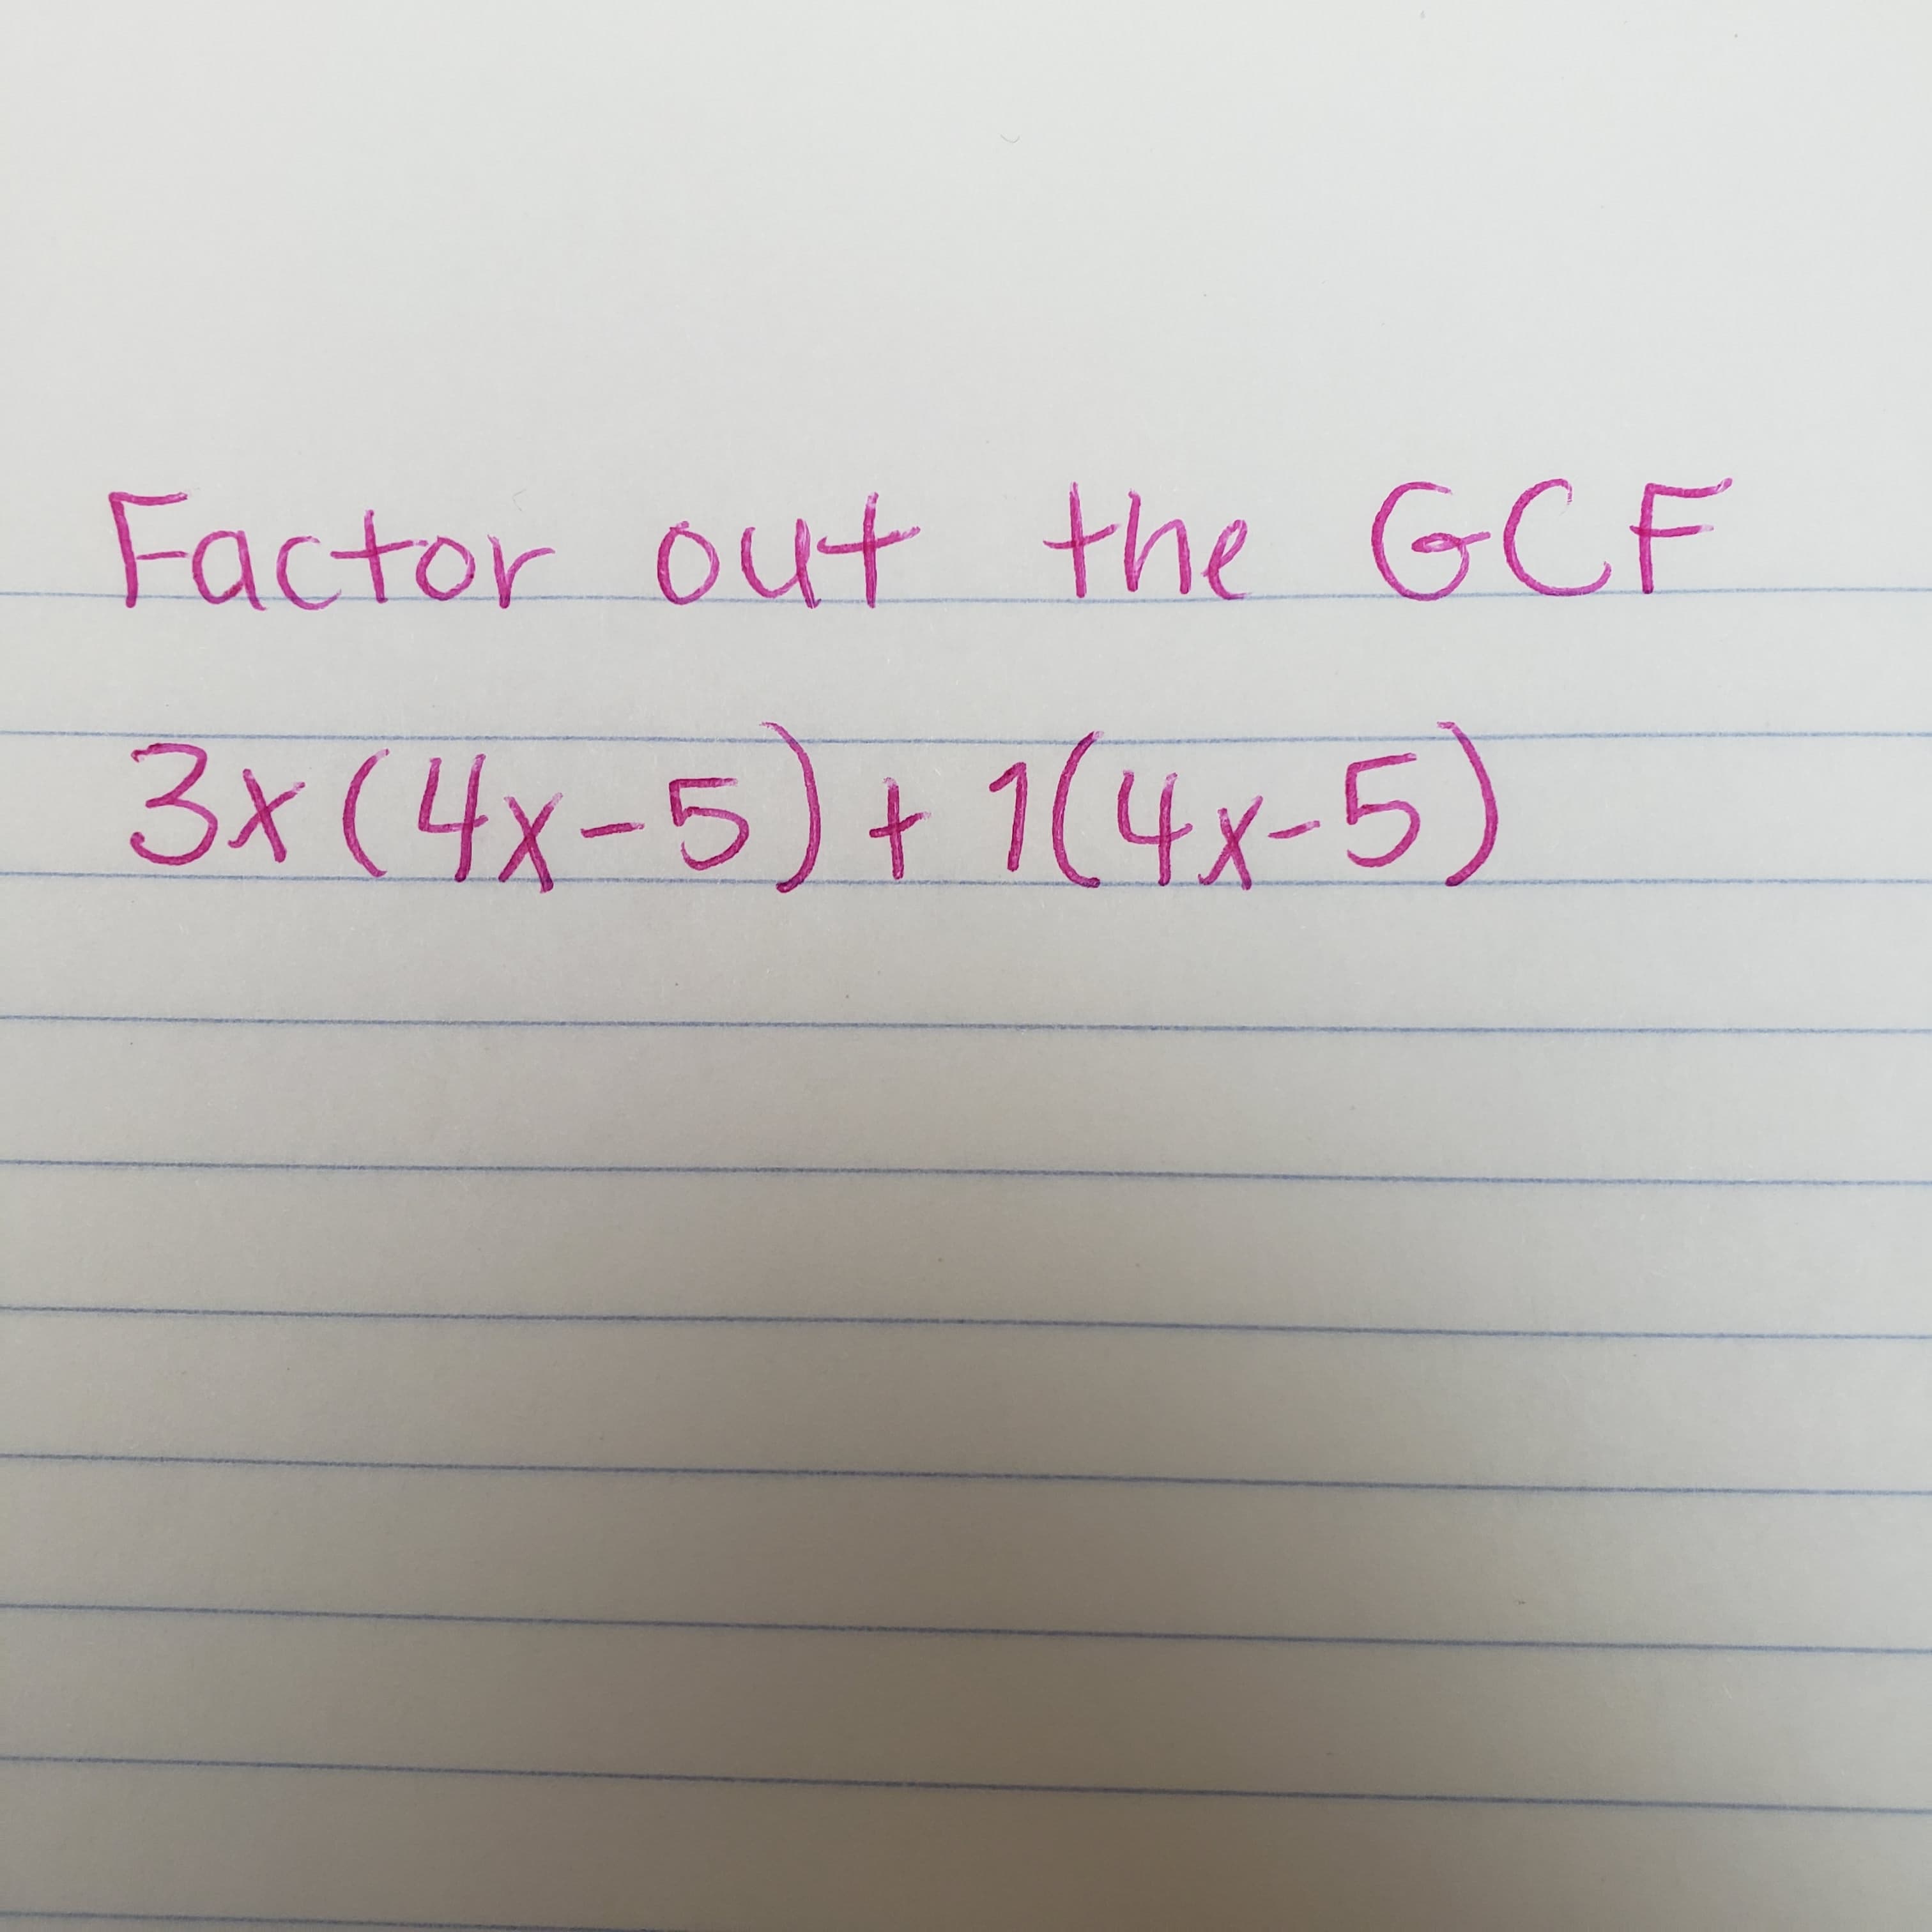 Factor out the GCF
3x(4x-5)+ 1(4x-5)
